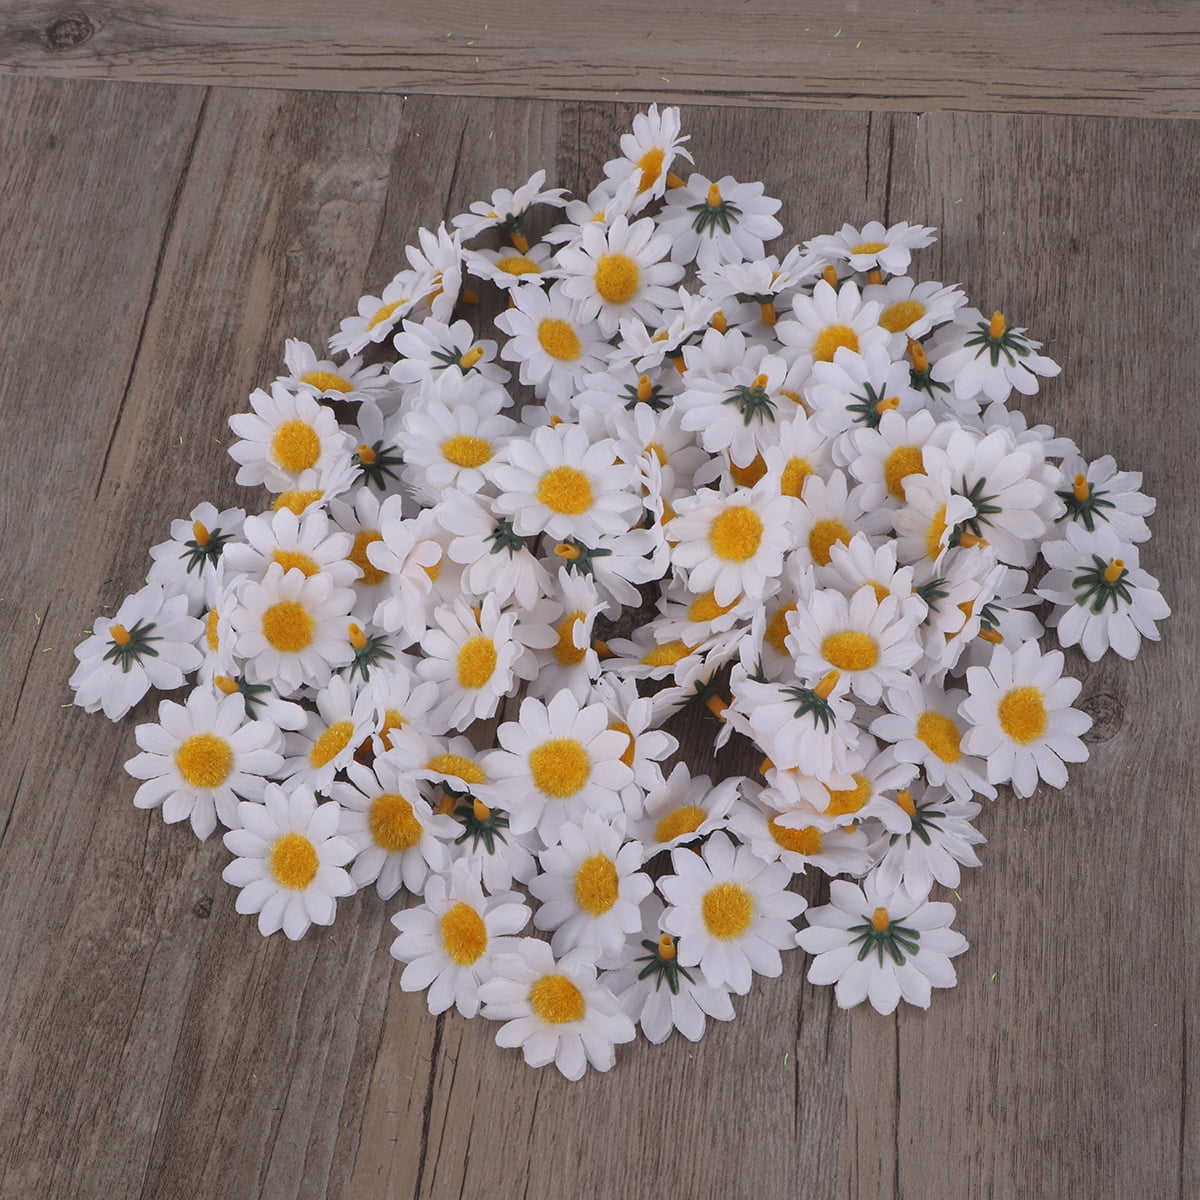 Approx 100pcs Artificial Gerbera Daisy Flowers Heads for DIY Wedding Party White 